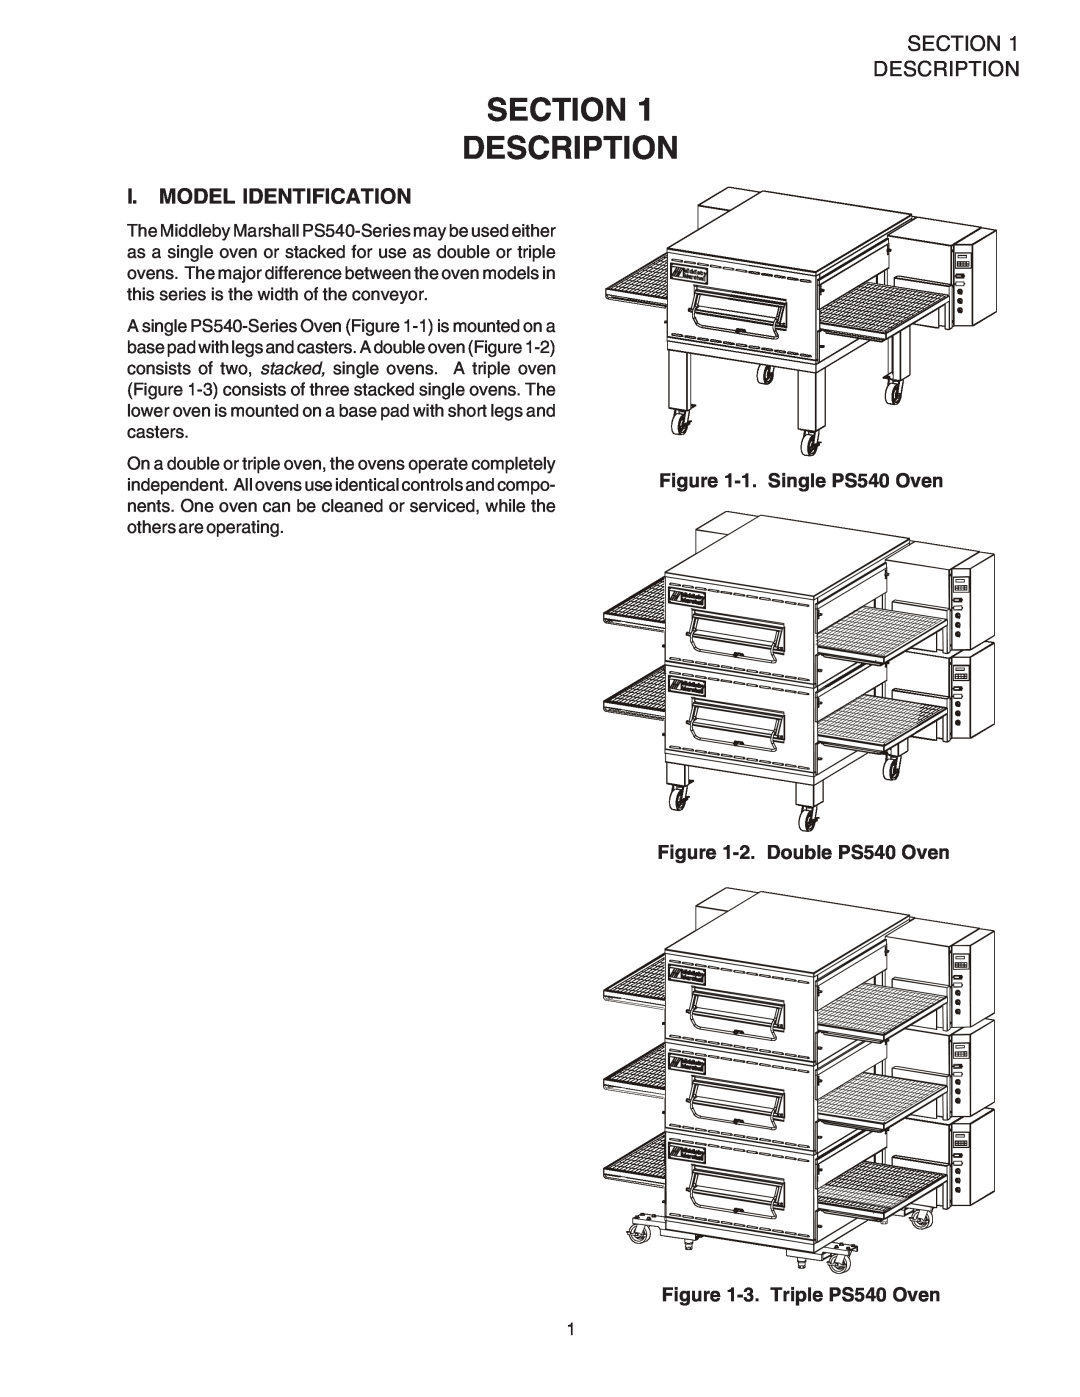 Middleby Marshall PS540G installation manual Section Description, I. Model Identification, 1. Single PS540 Oven 